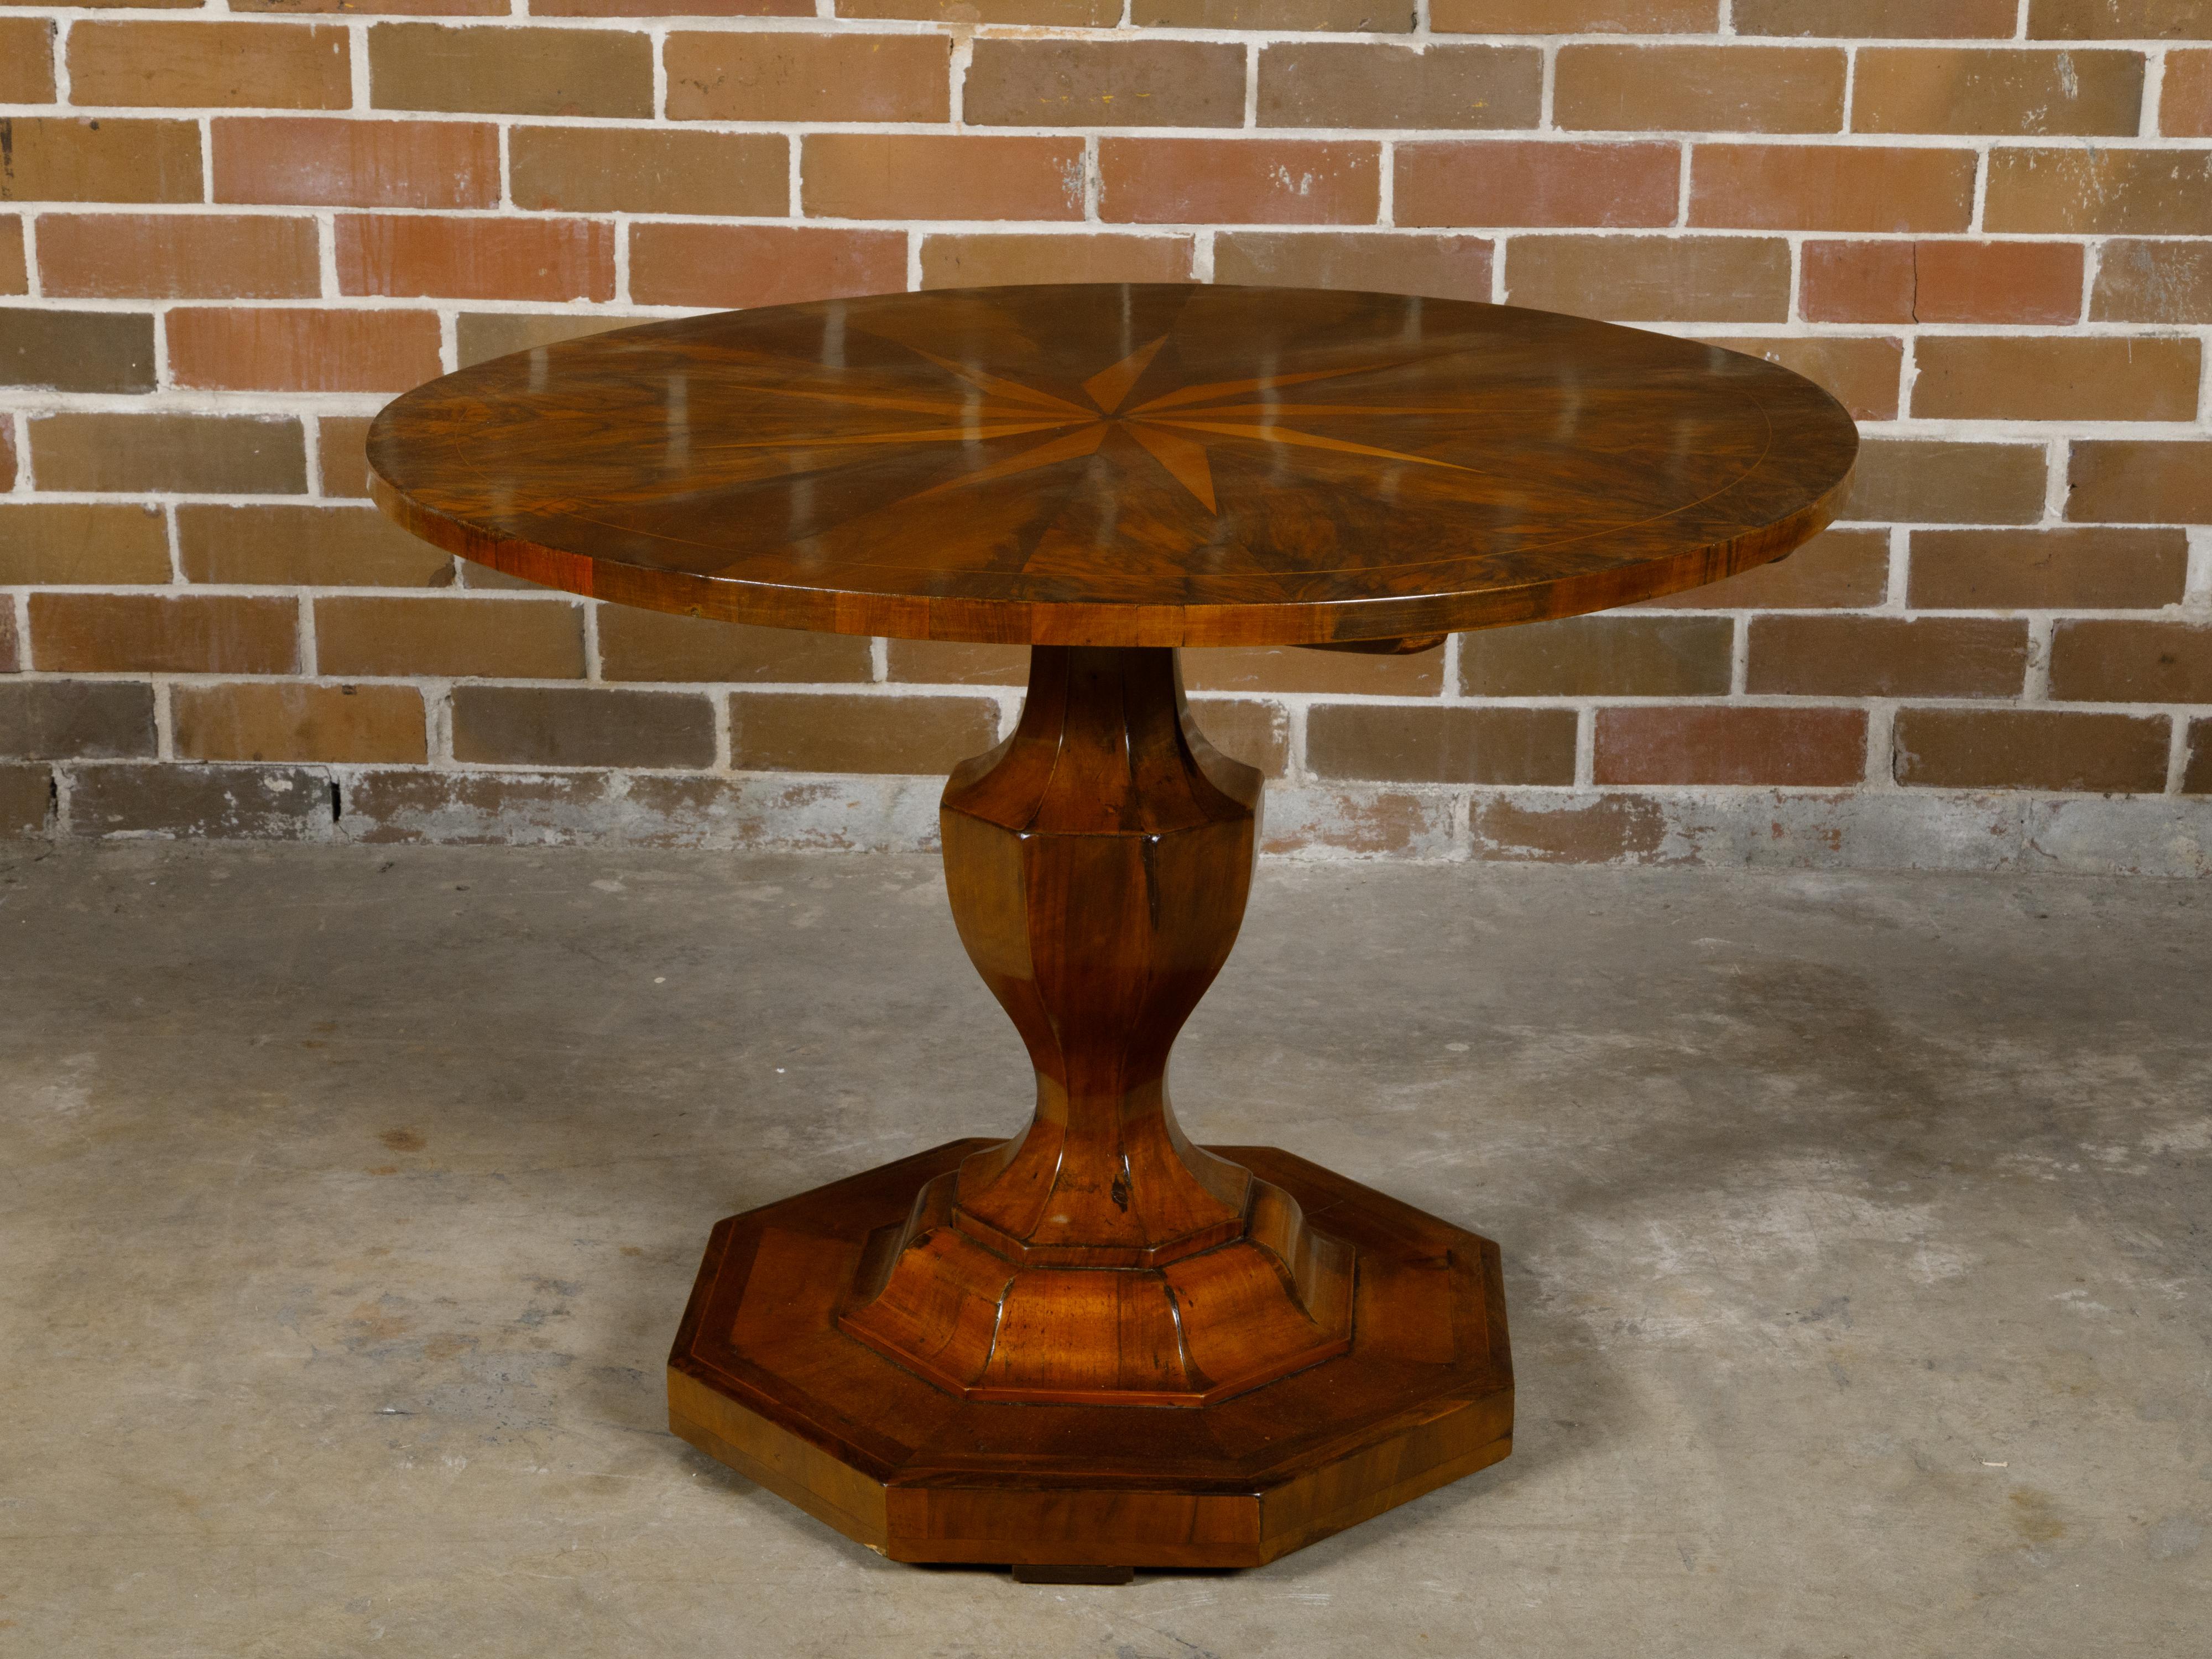 A Biedermeier period walnut center table from the 19th century with circular marquetry top, radiating motifs and pedestal base. This 19th-century Biedermeier period walnut center table is a masterpiece of design and craftsmanship, blending the